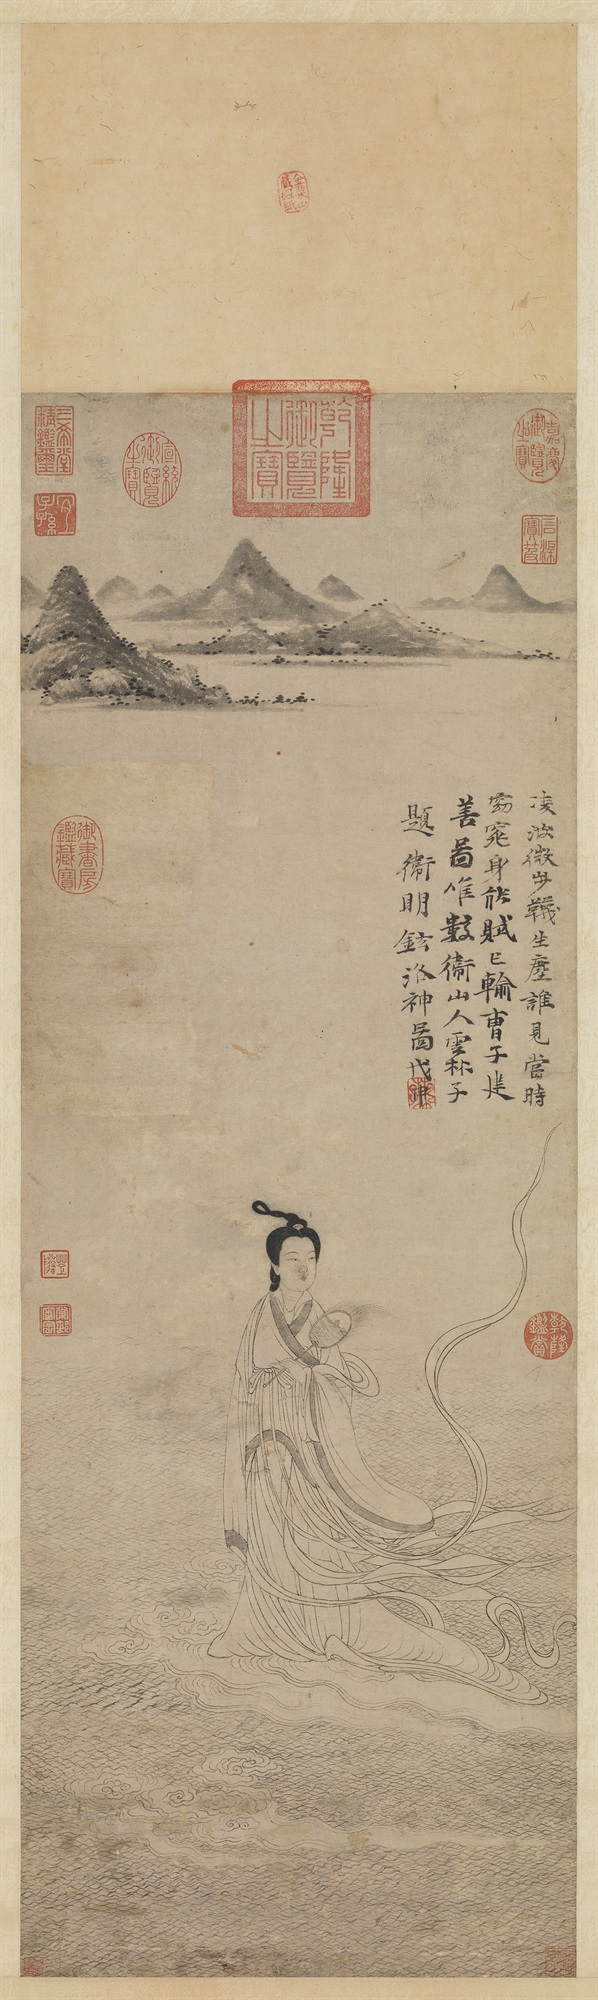 Goddess of the Luo River Wei Jiuding (ca. 14th c.), Yuan dynastypreview